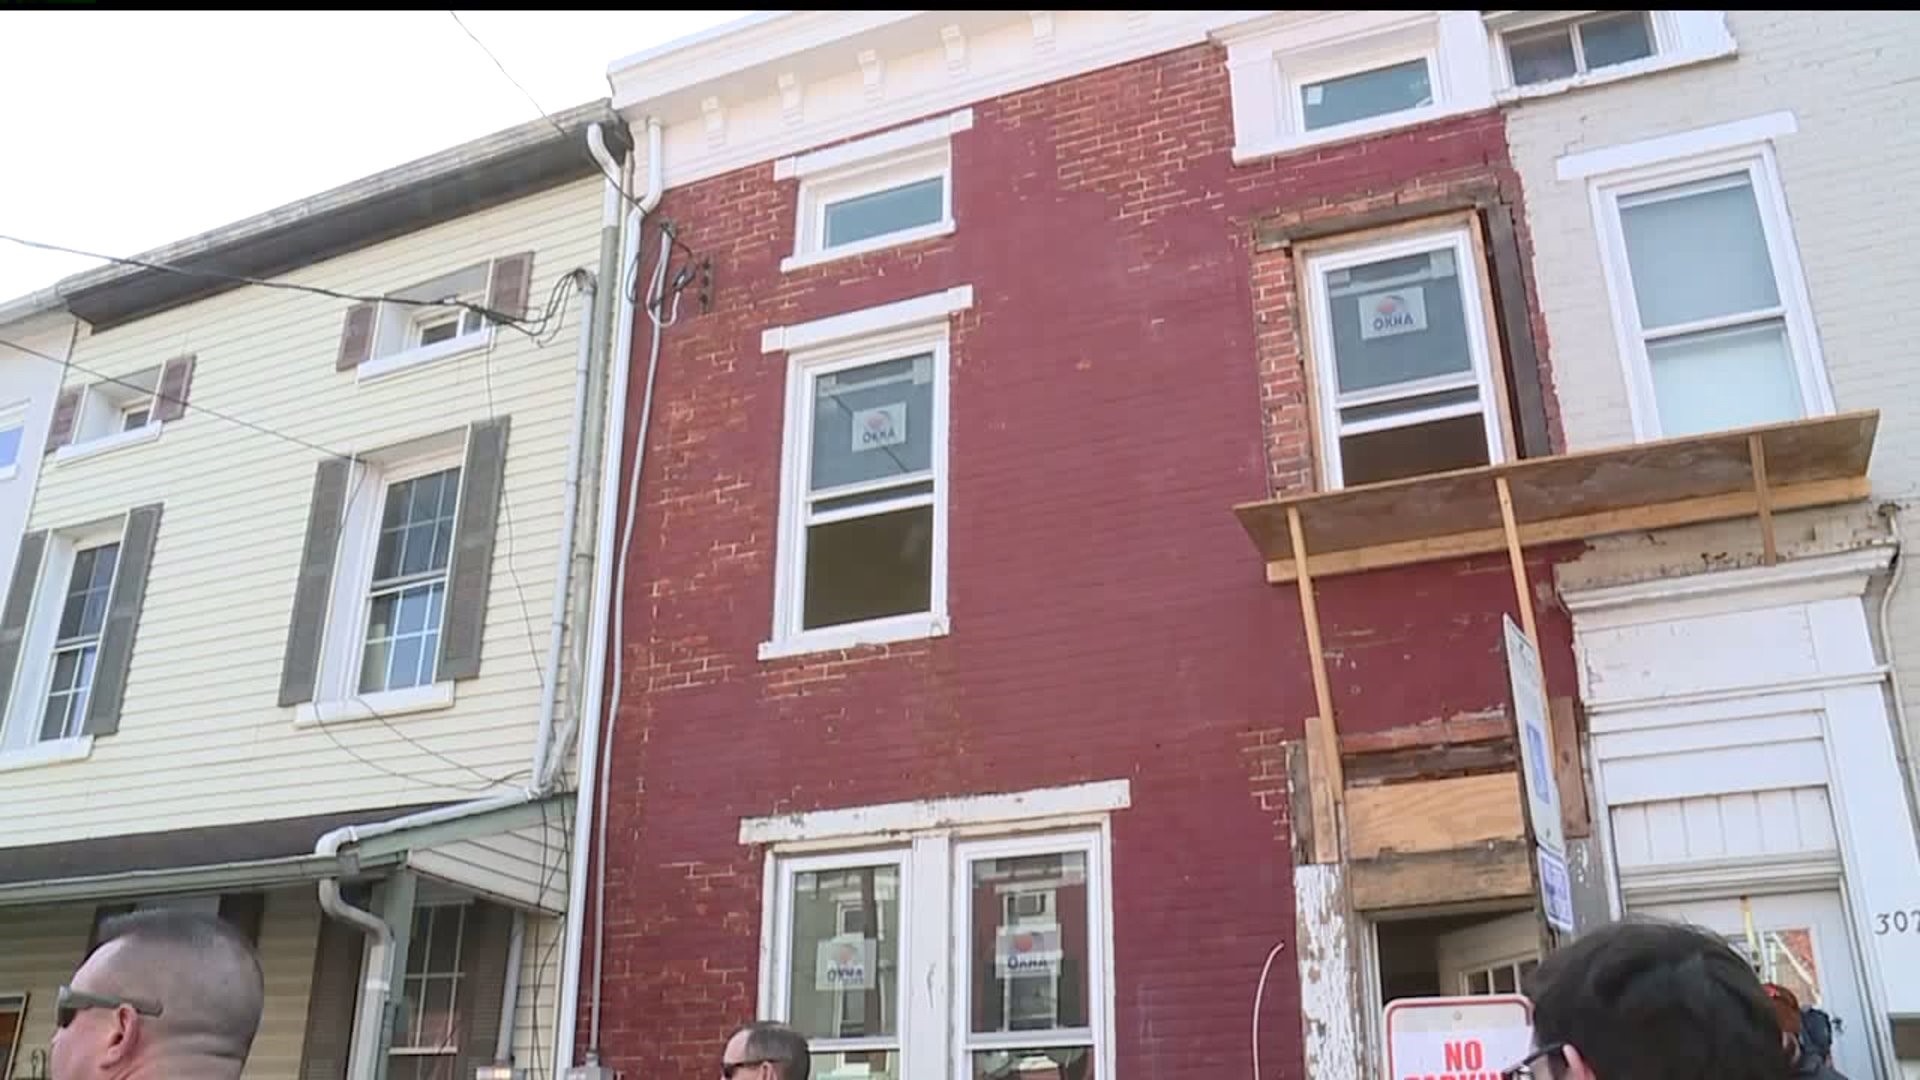 Gov. Wolf tours blighted Columbia properties